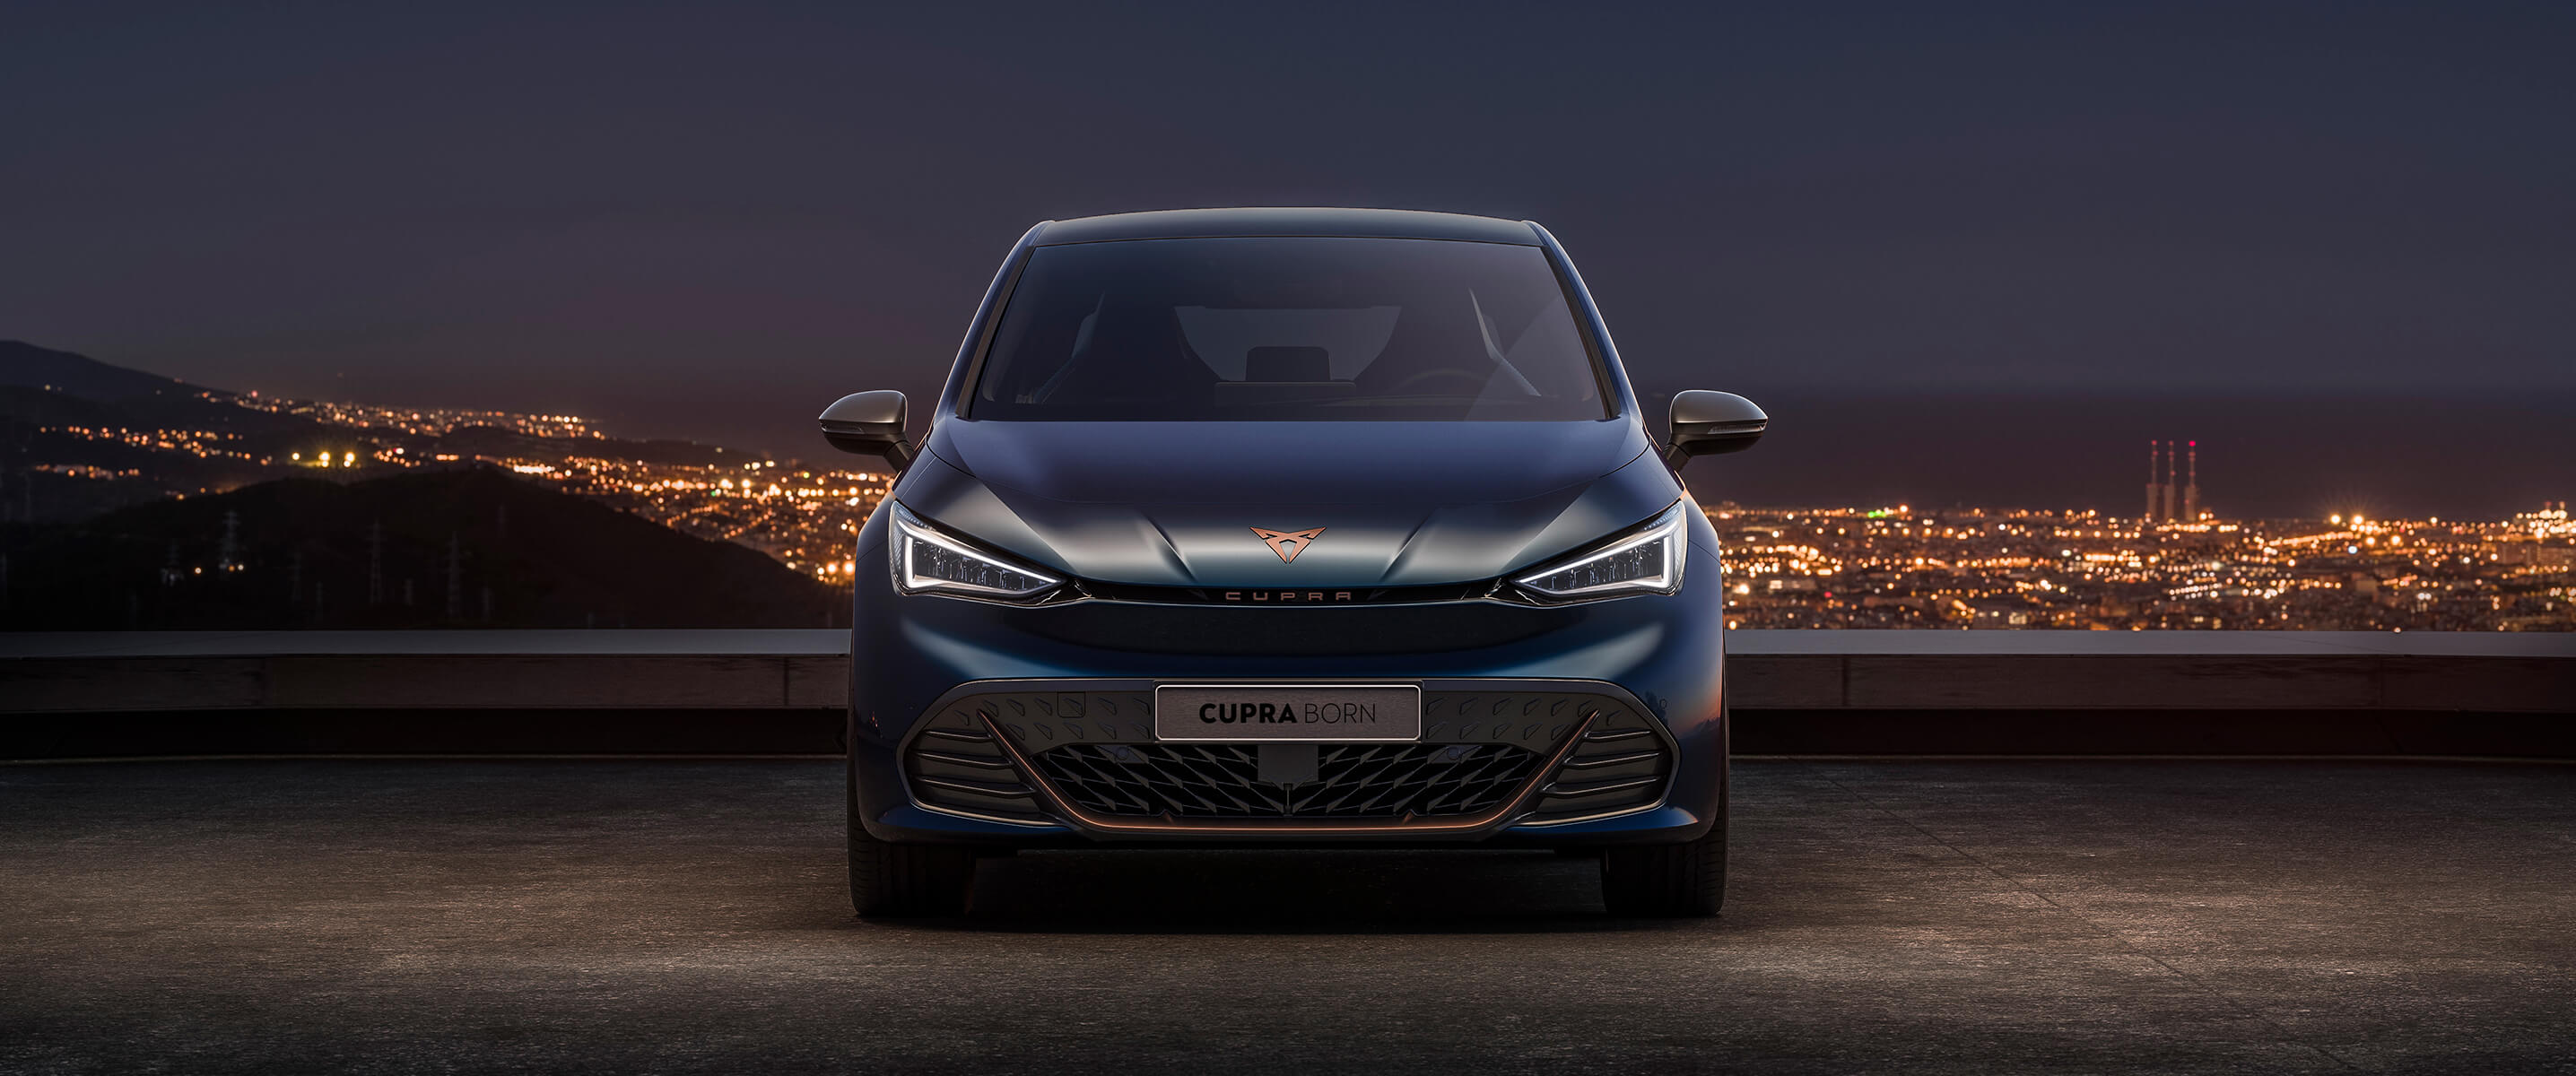 Front view of a CUPRA Born at night